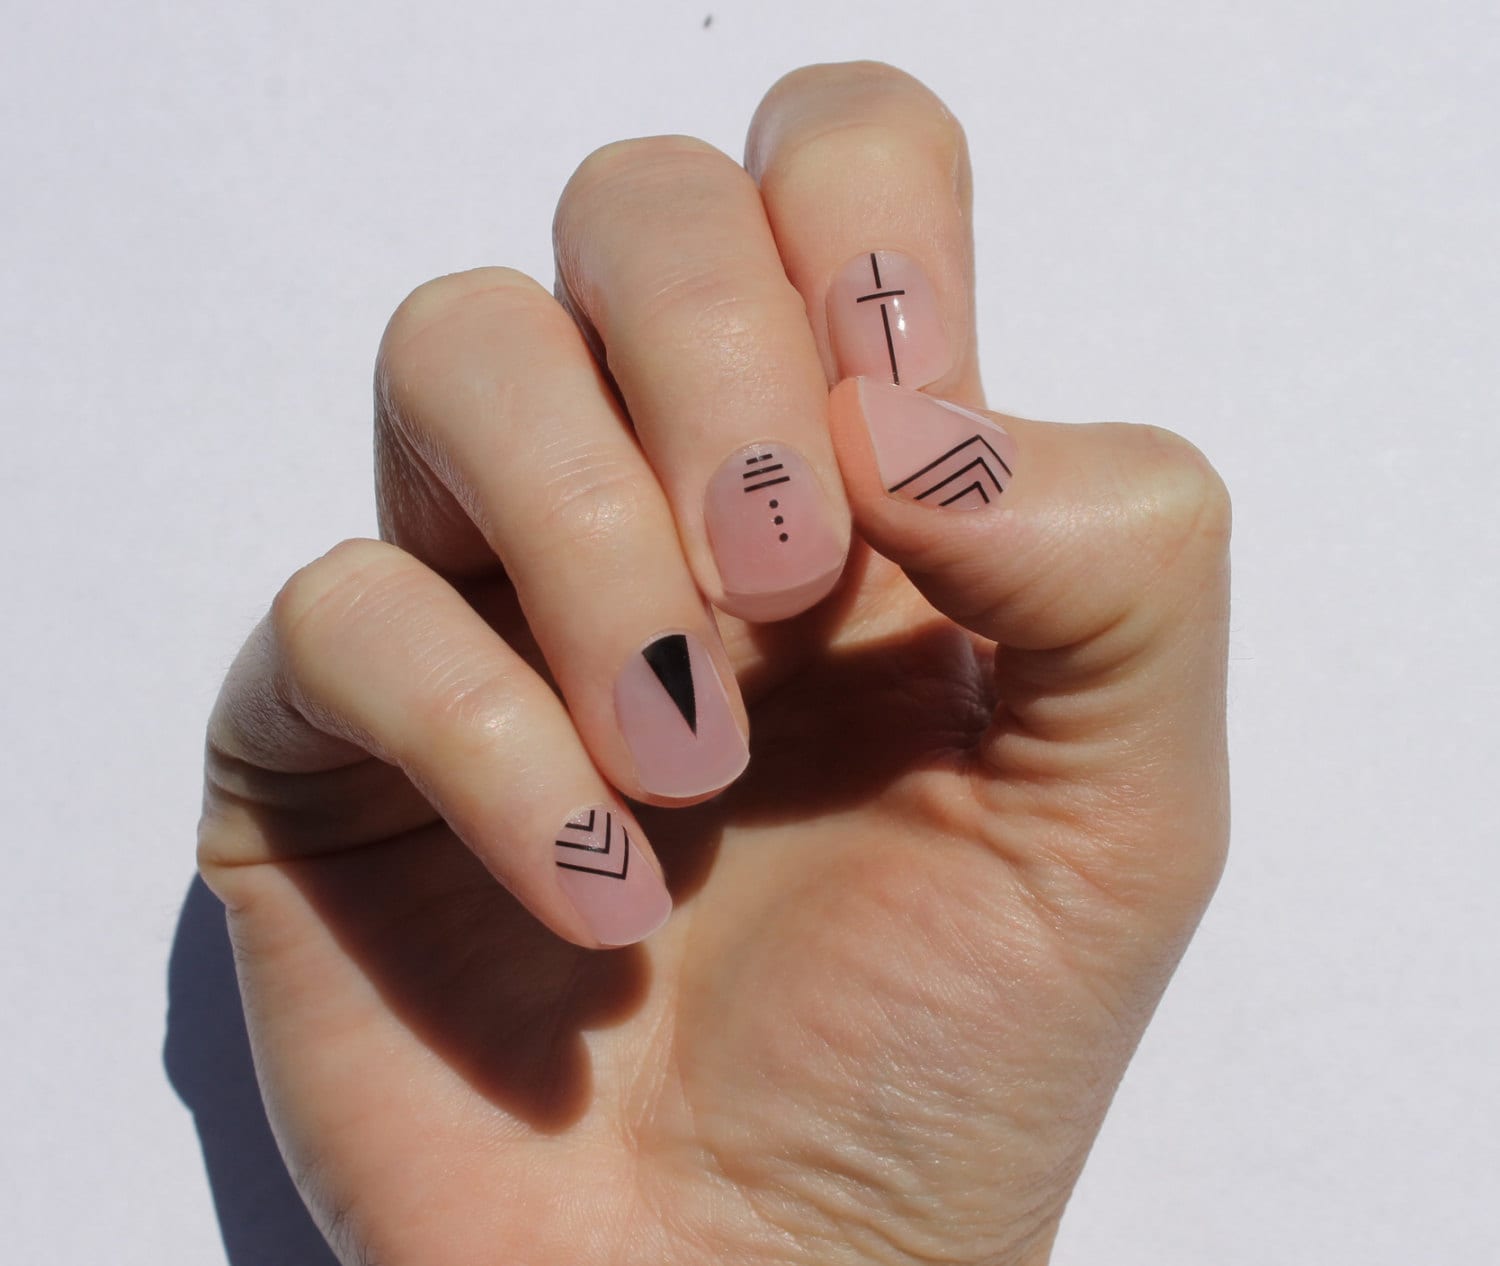 King Queen Jack Ace Spade Nail Art Decal Sticker - Nailodia